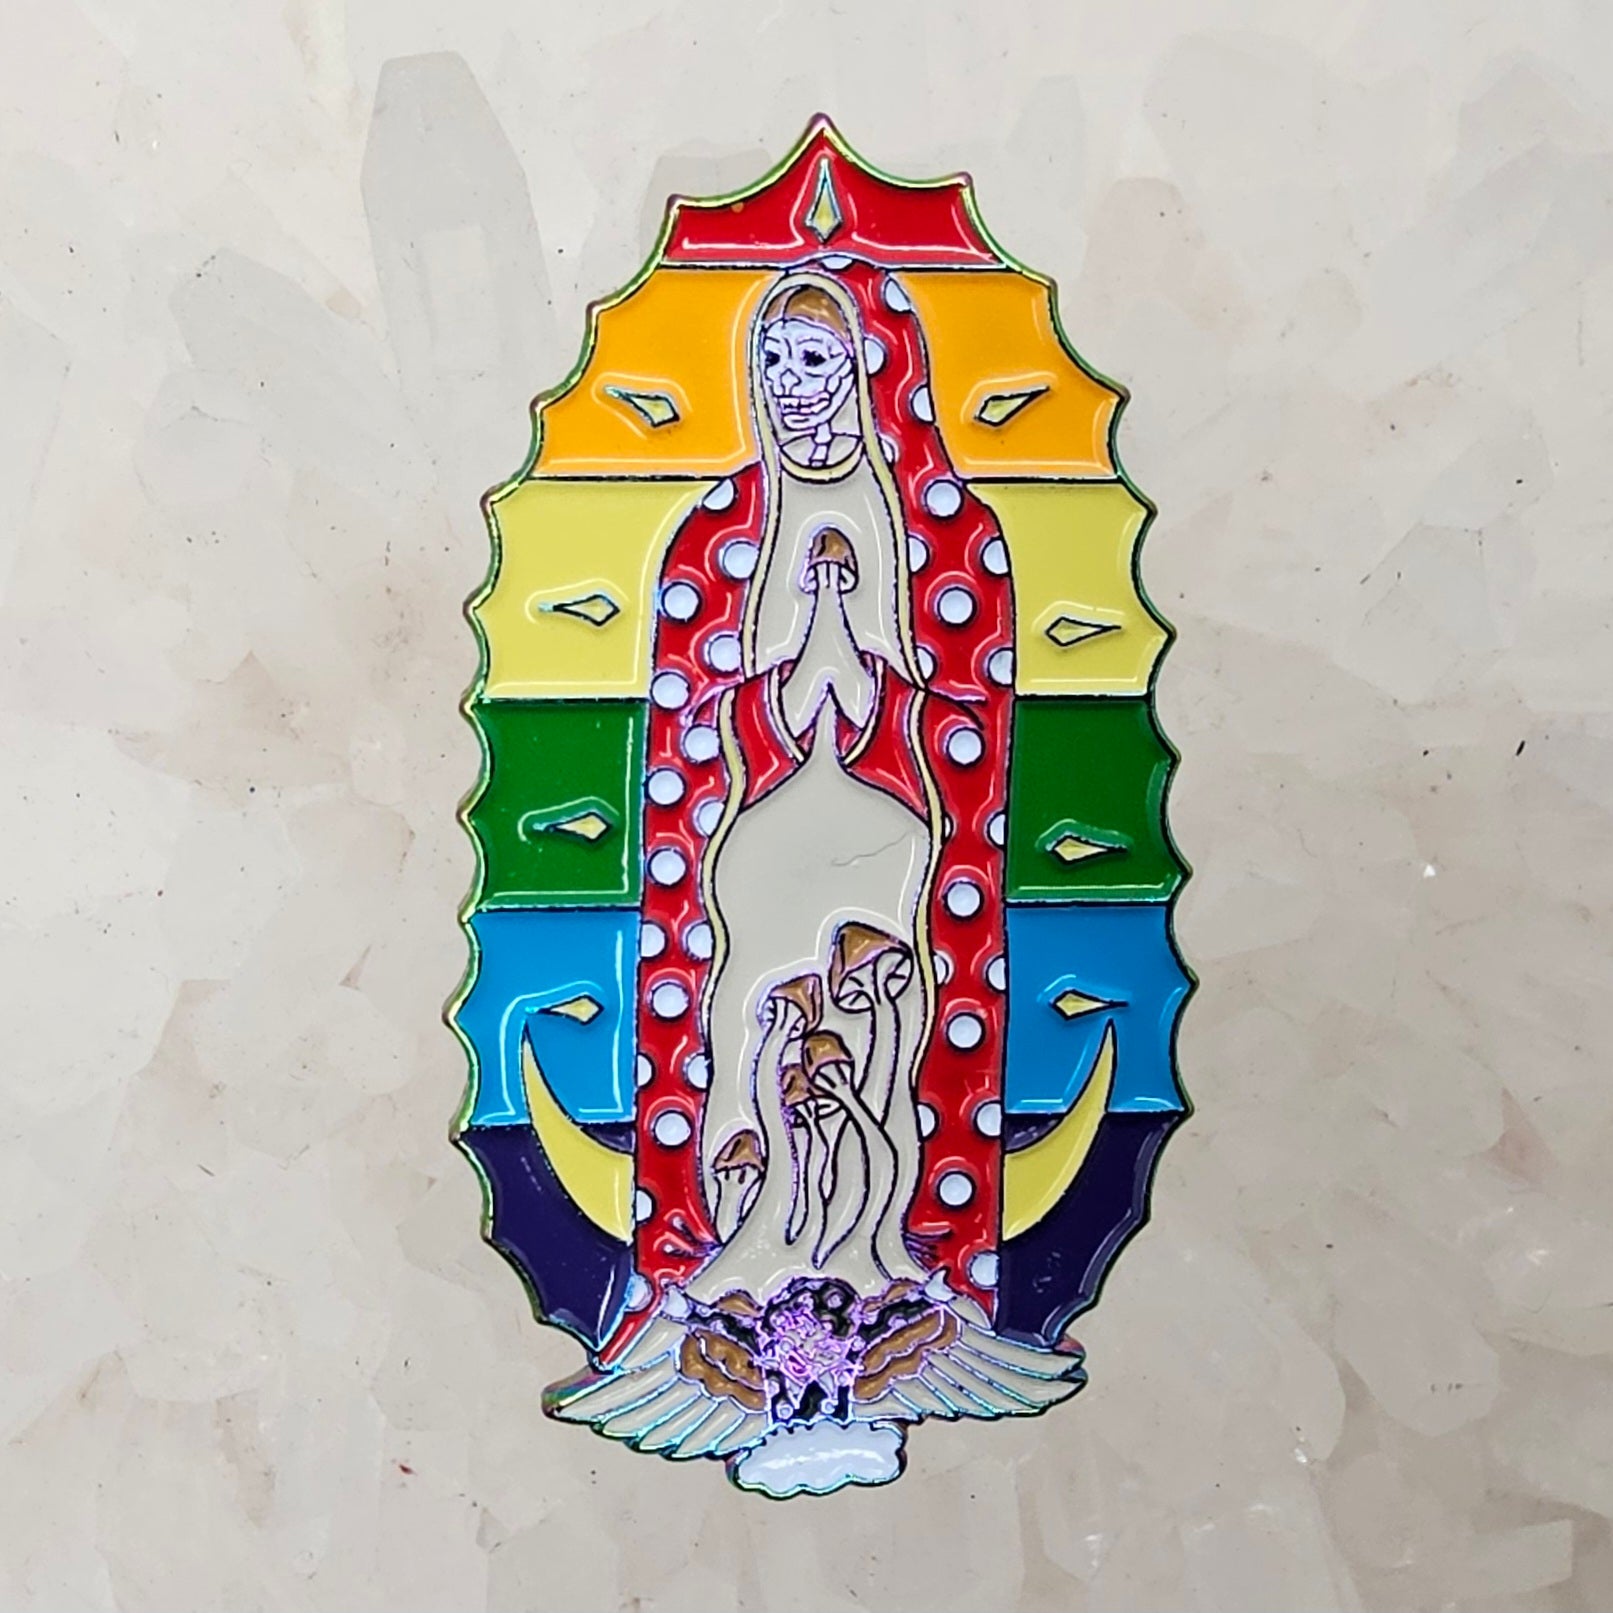 Mary Mother Of Mushrooms Hippie Psychedelic Art Rainbow Metal Enamel Pins Hat Pins Lapel Pin Brooch Badge Festival Pin